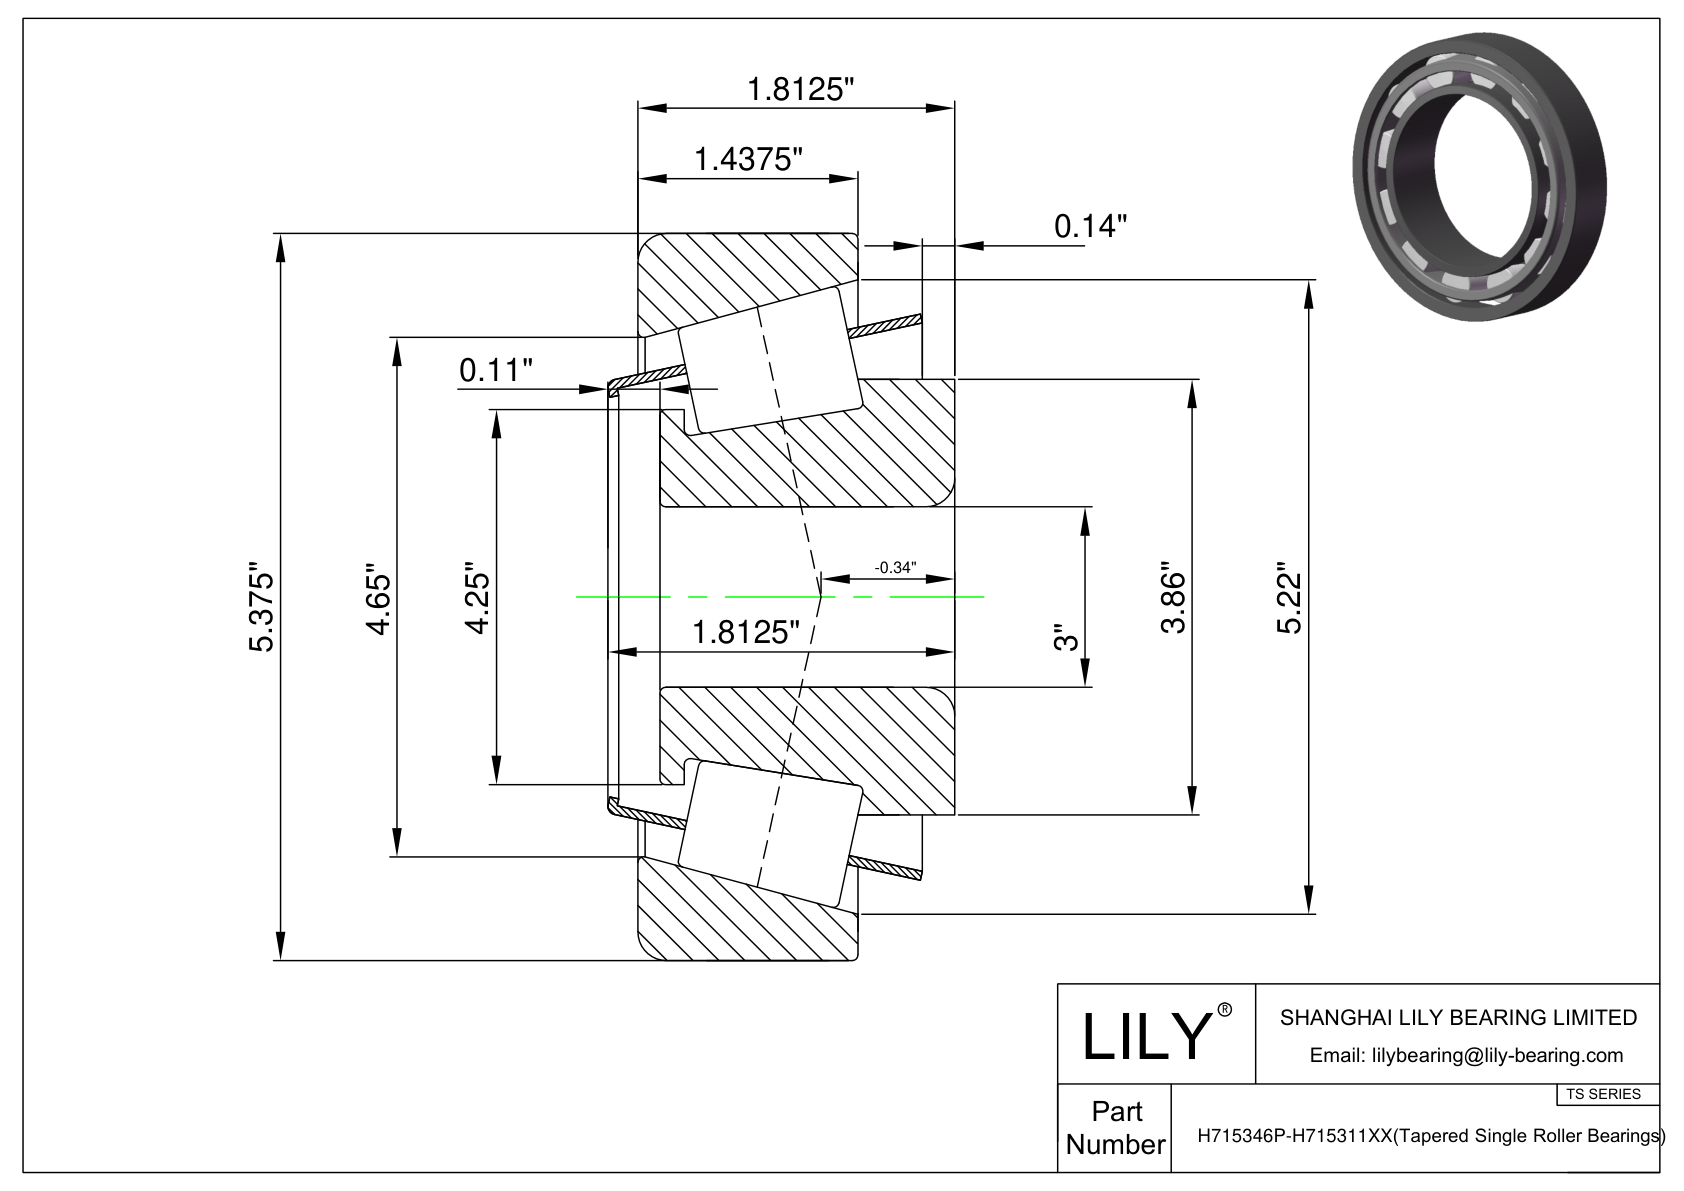 H715346P-H715311XX TS (Tapered Single Roller Bearings) (Imperial) cad drawing